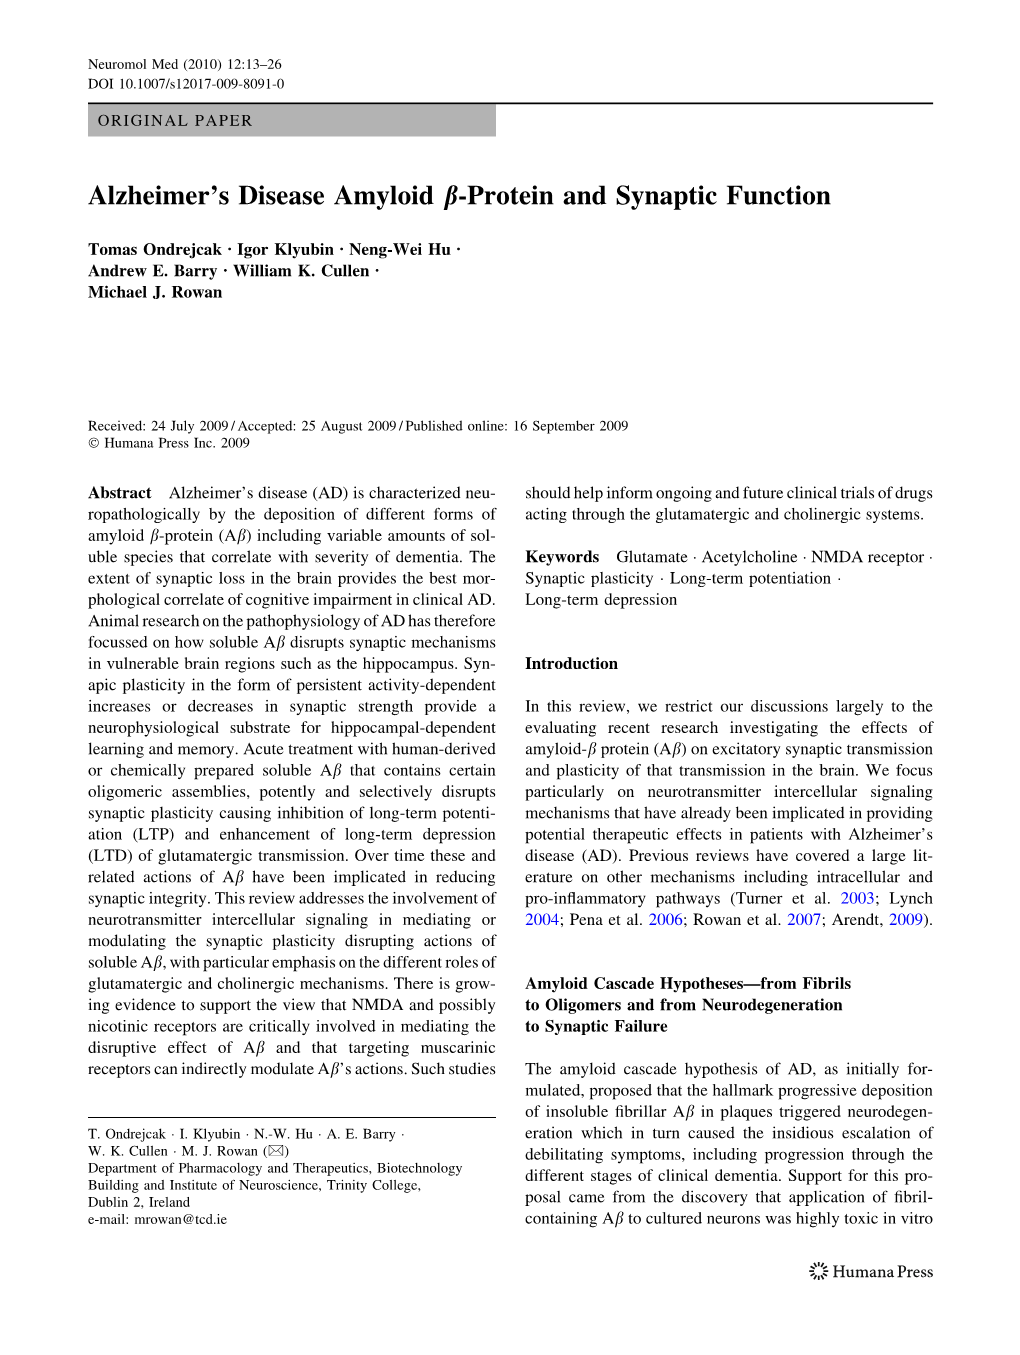 Alzheimer's Disease Amyloid B-Protein and Synaptic Function